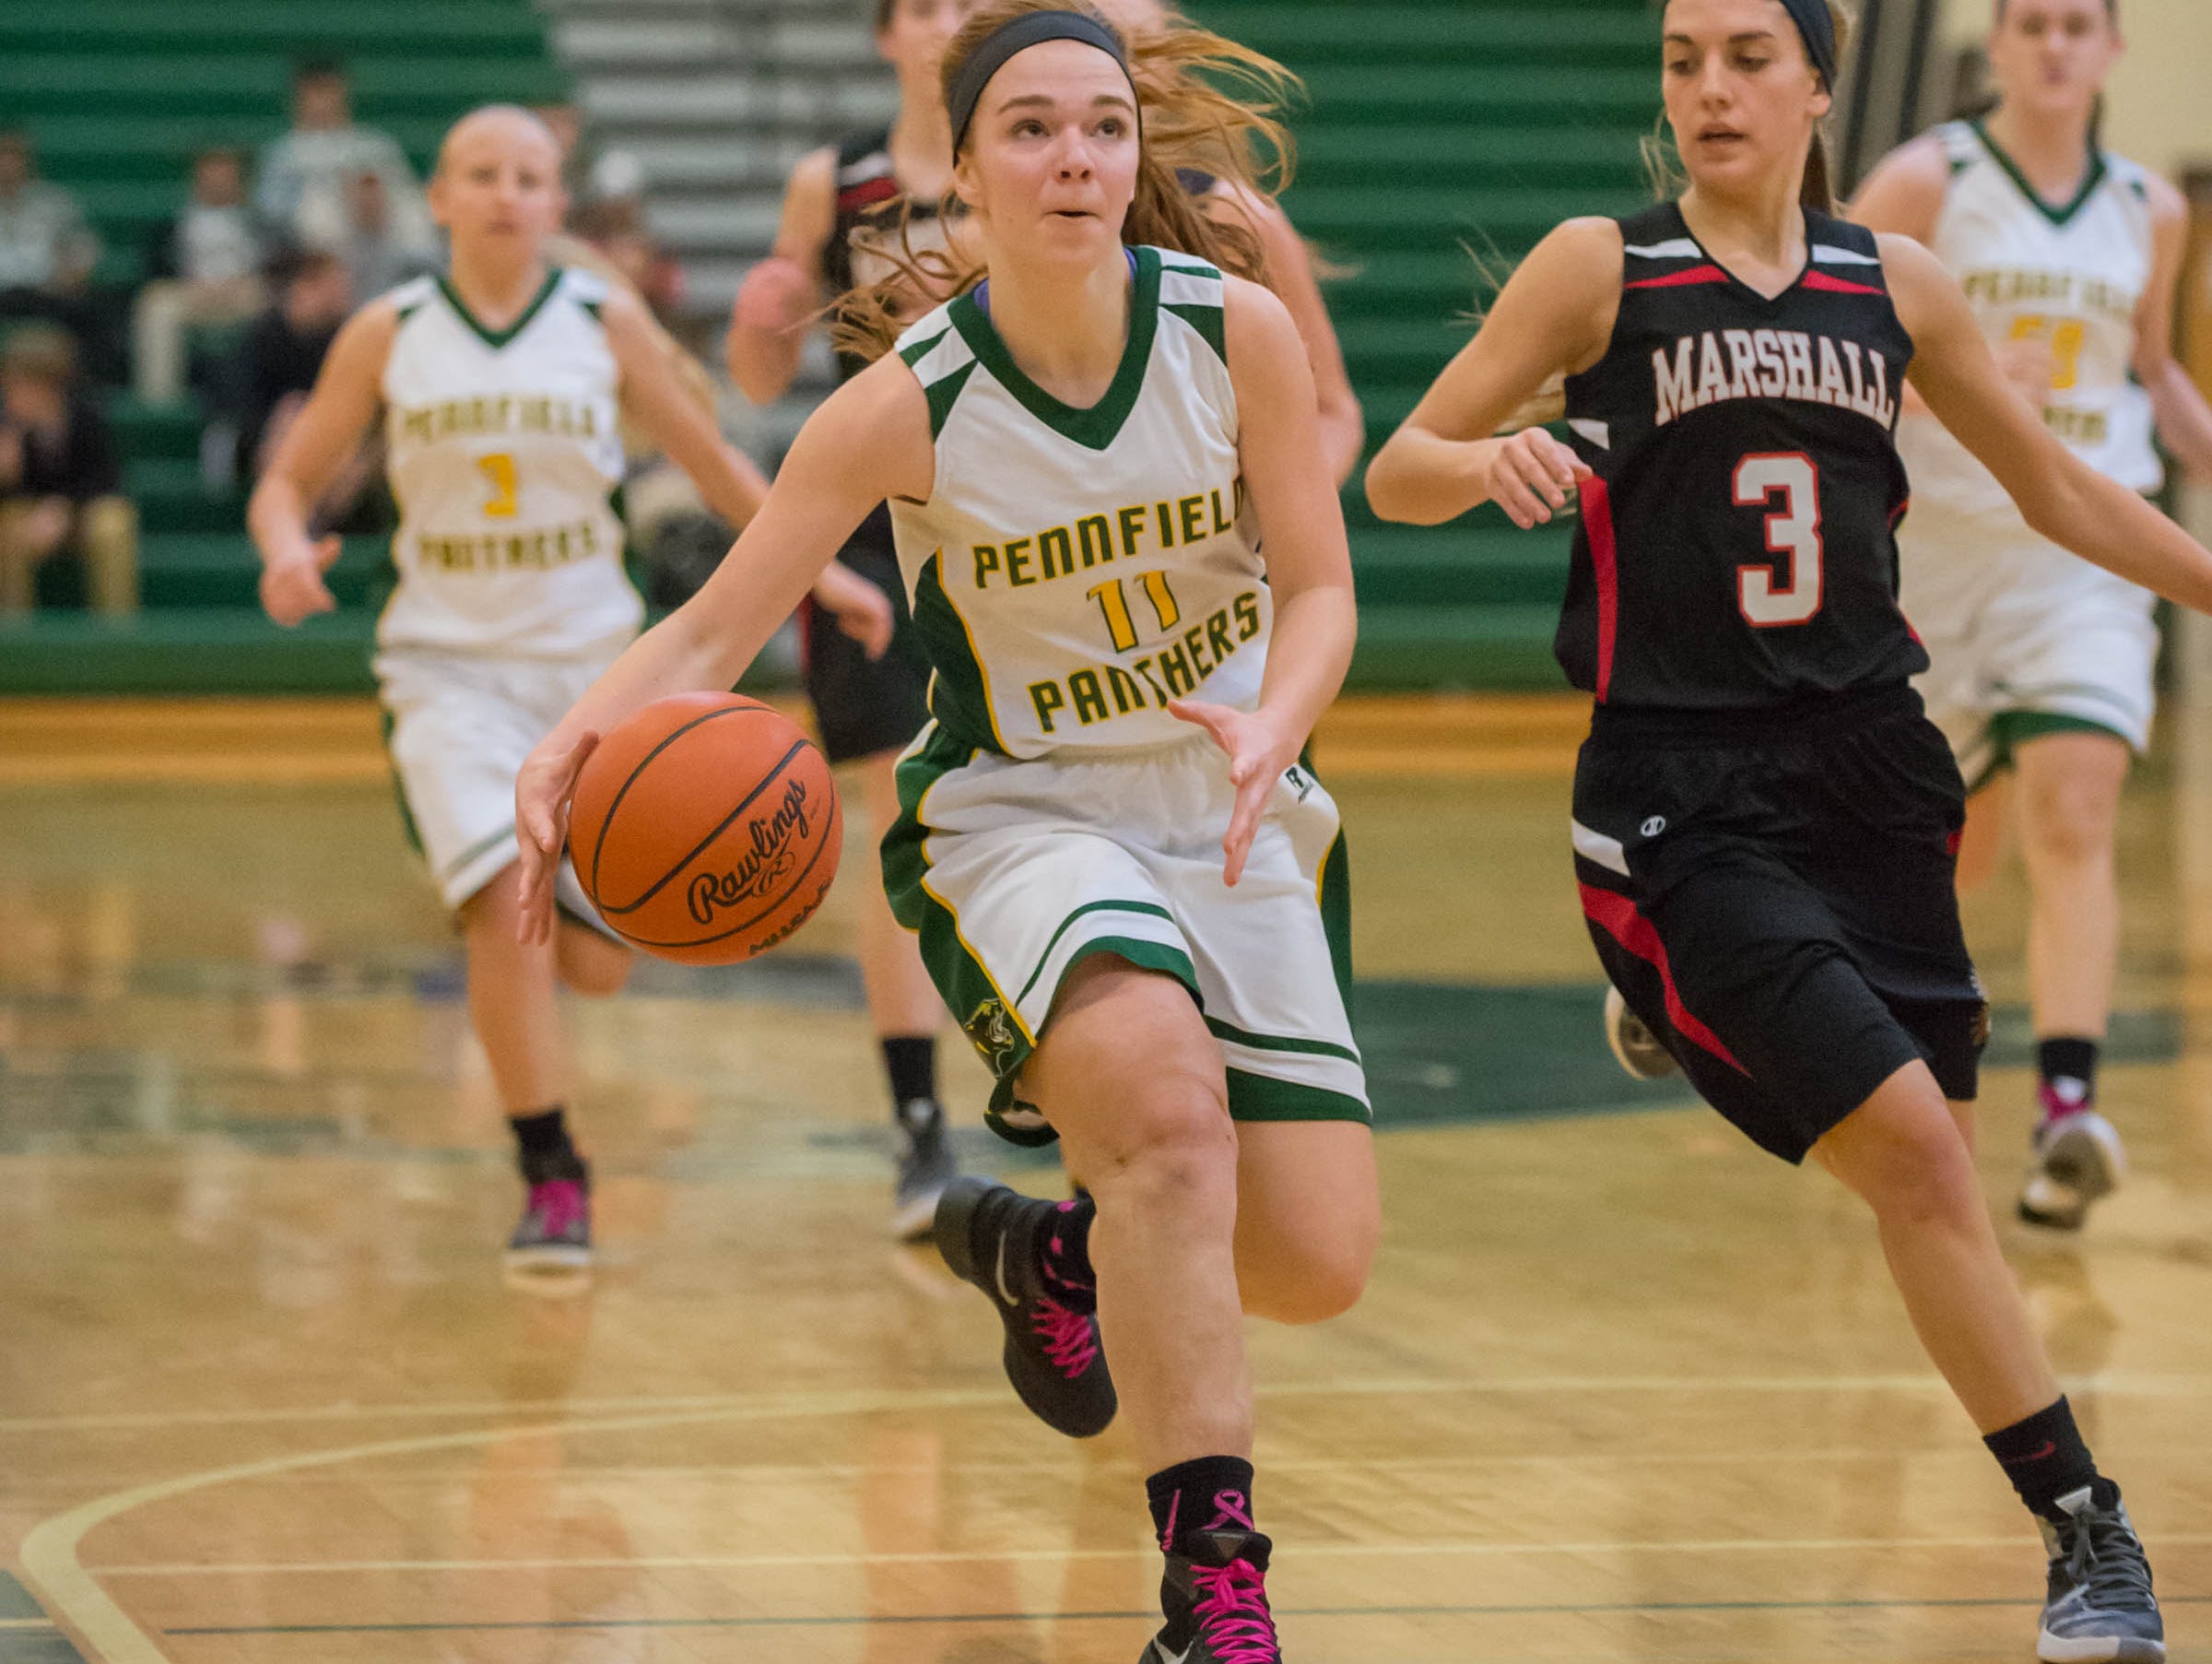 Pennfields's Melsnie Mcintyre (11) bring the ball down the court against Marshall Friday evening.